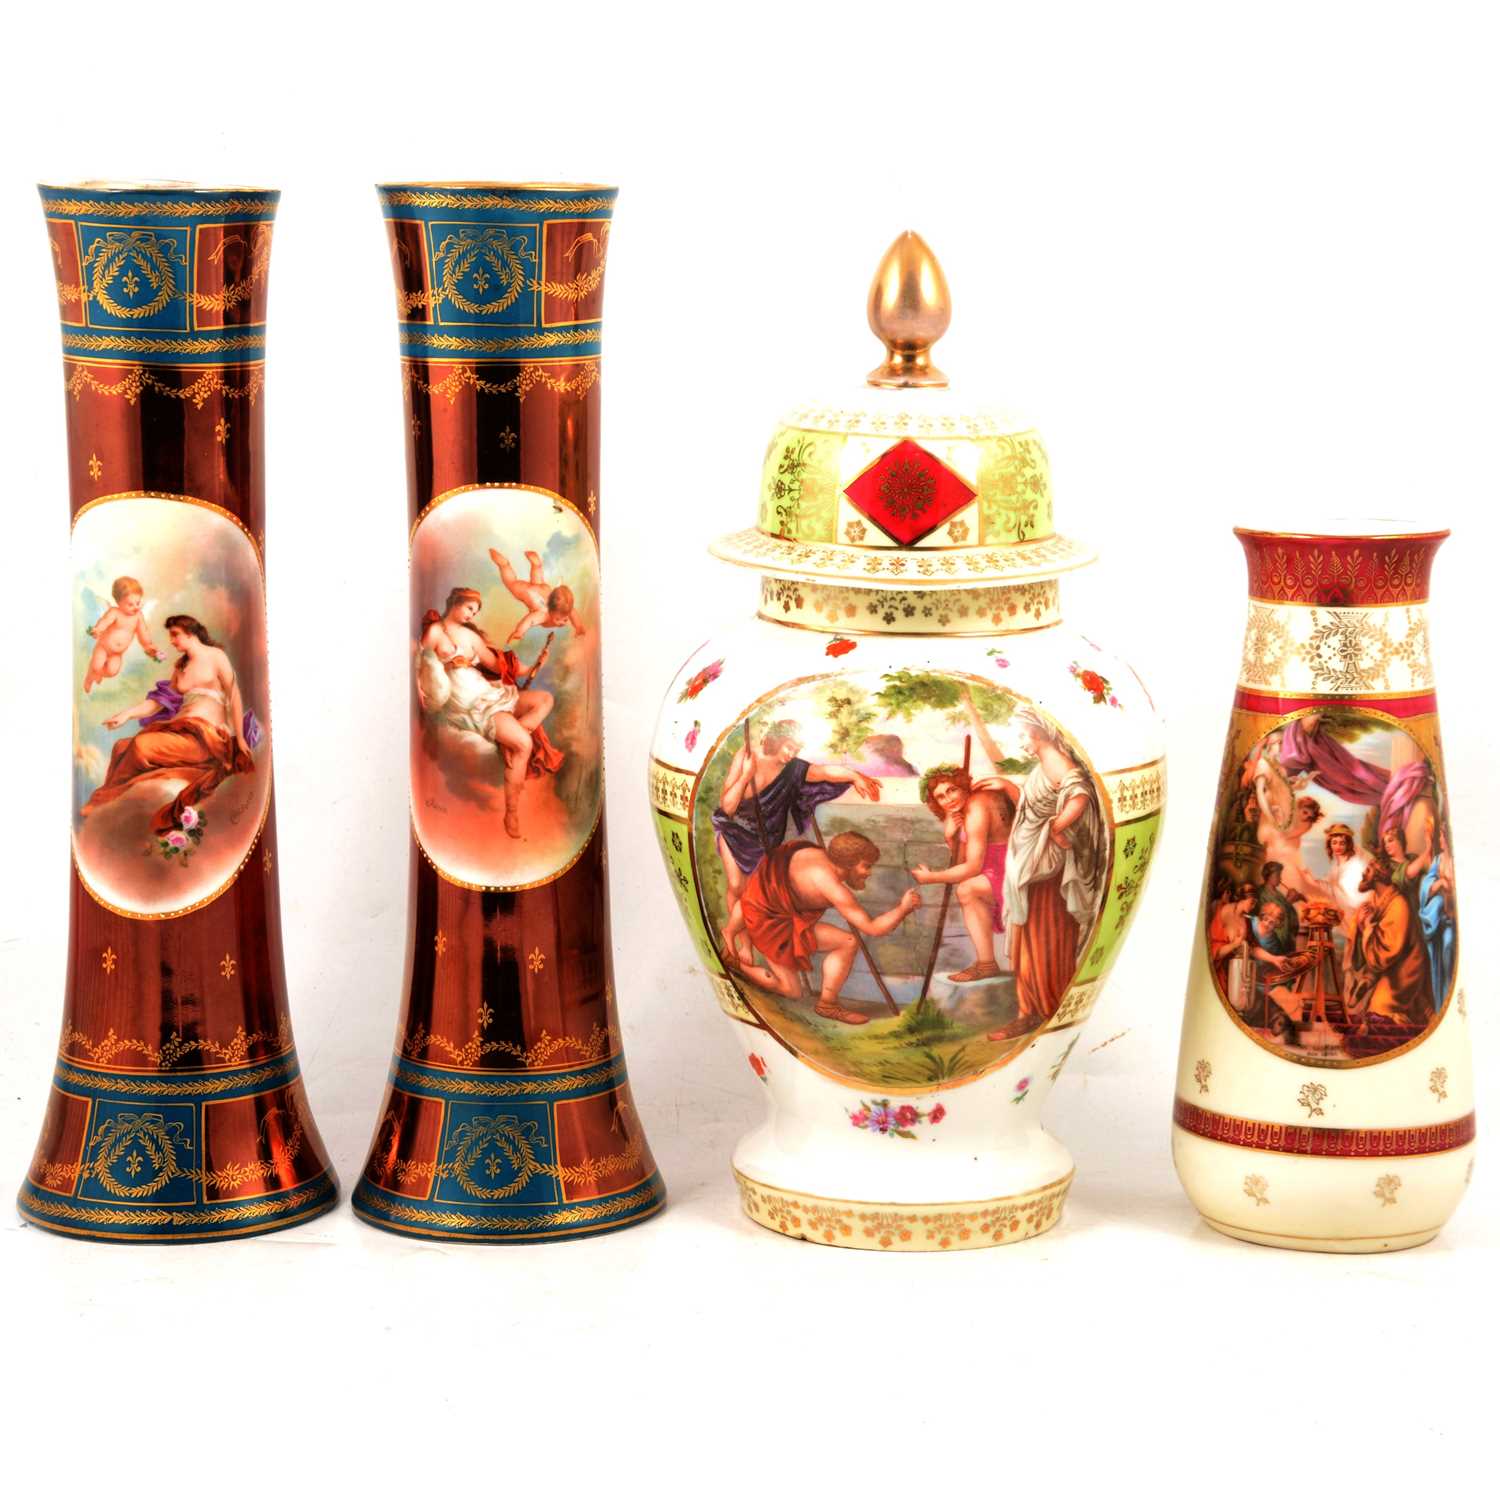 Lot 18 - Pair of Royal Vienna vases, a covered vase, and another vase